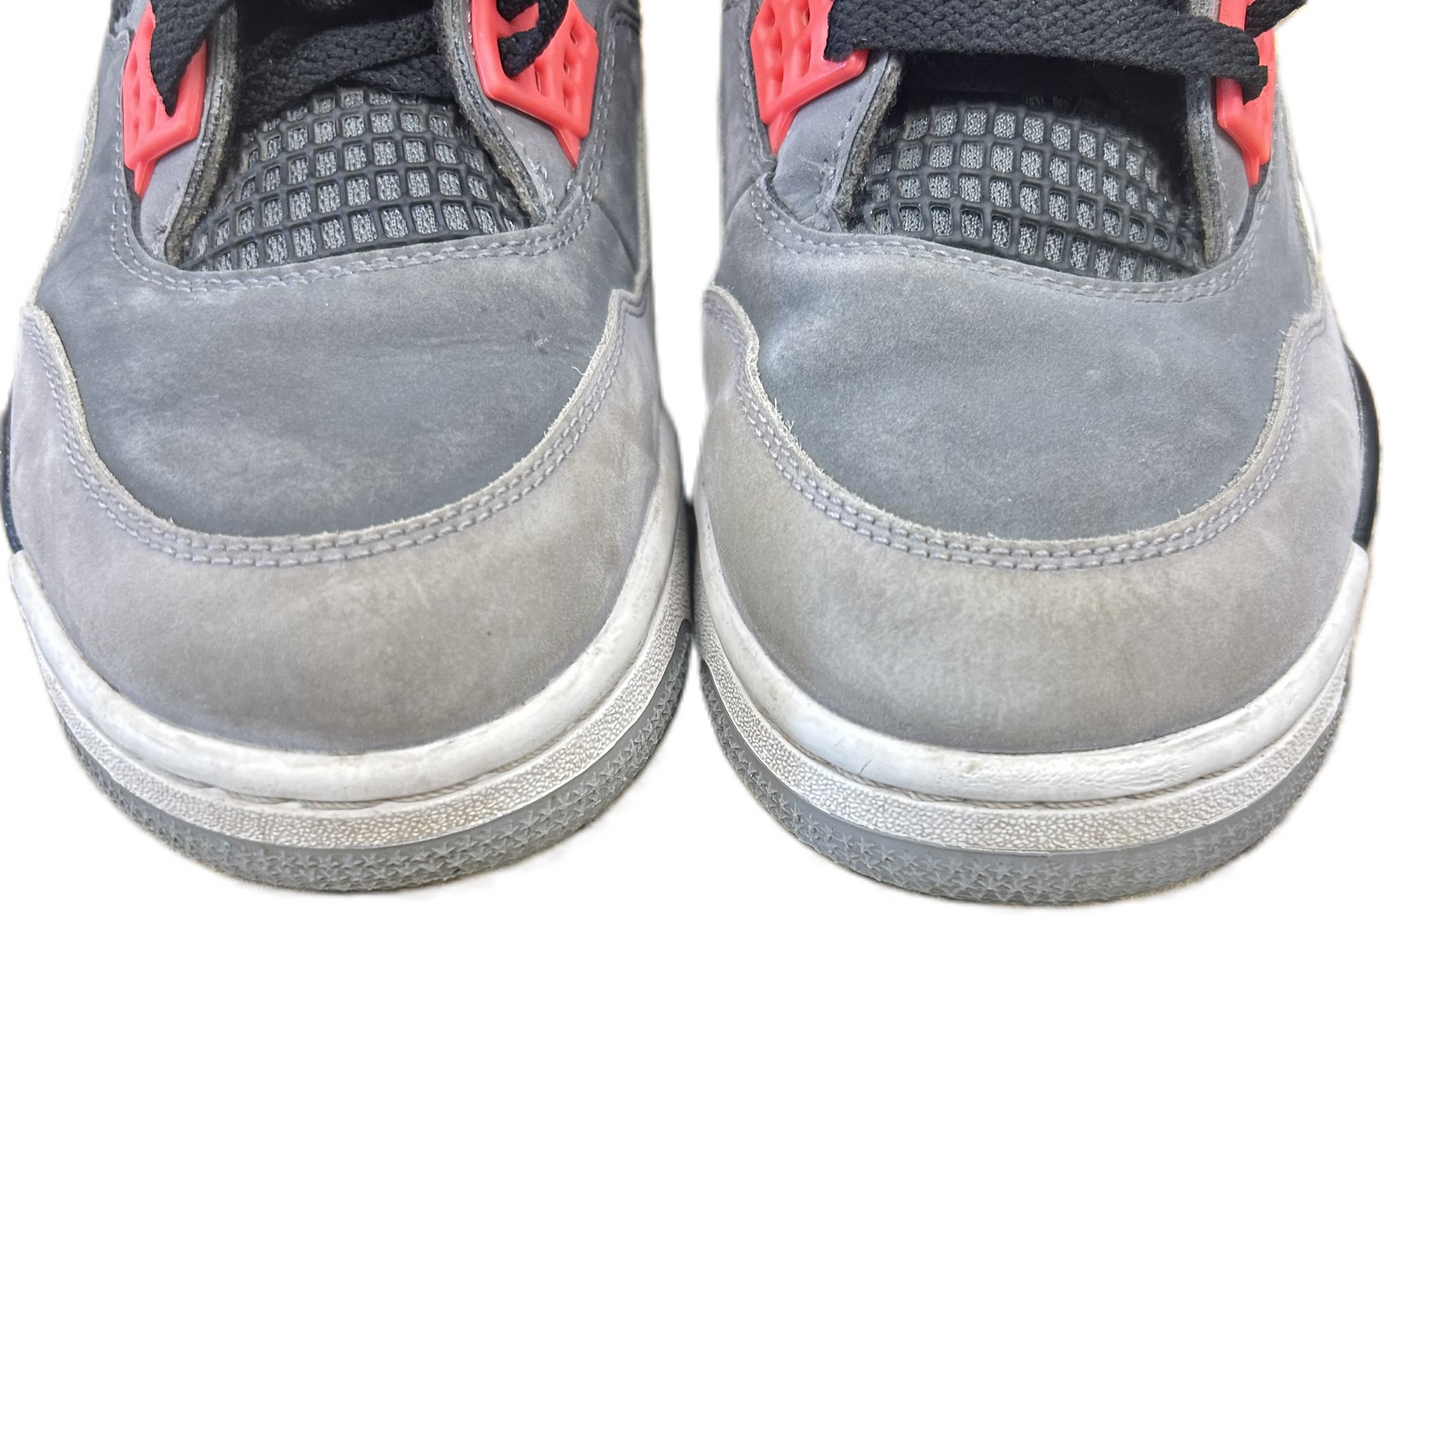 Grey & Red Shoes Sneakers By Jordan, Size: 12